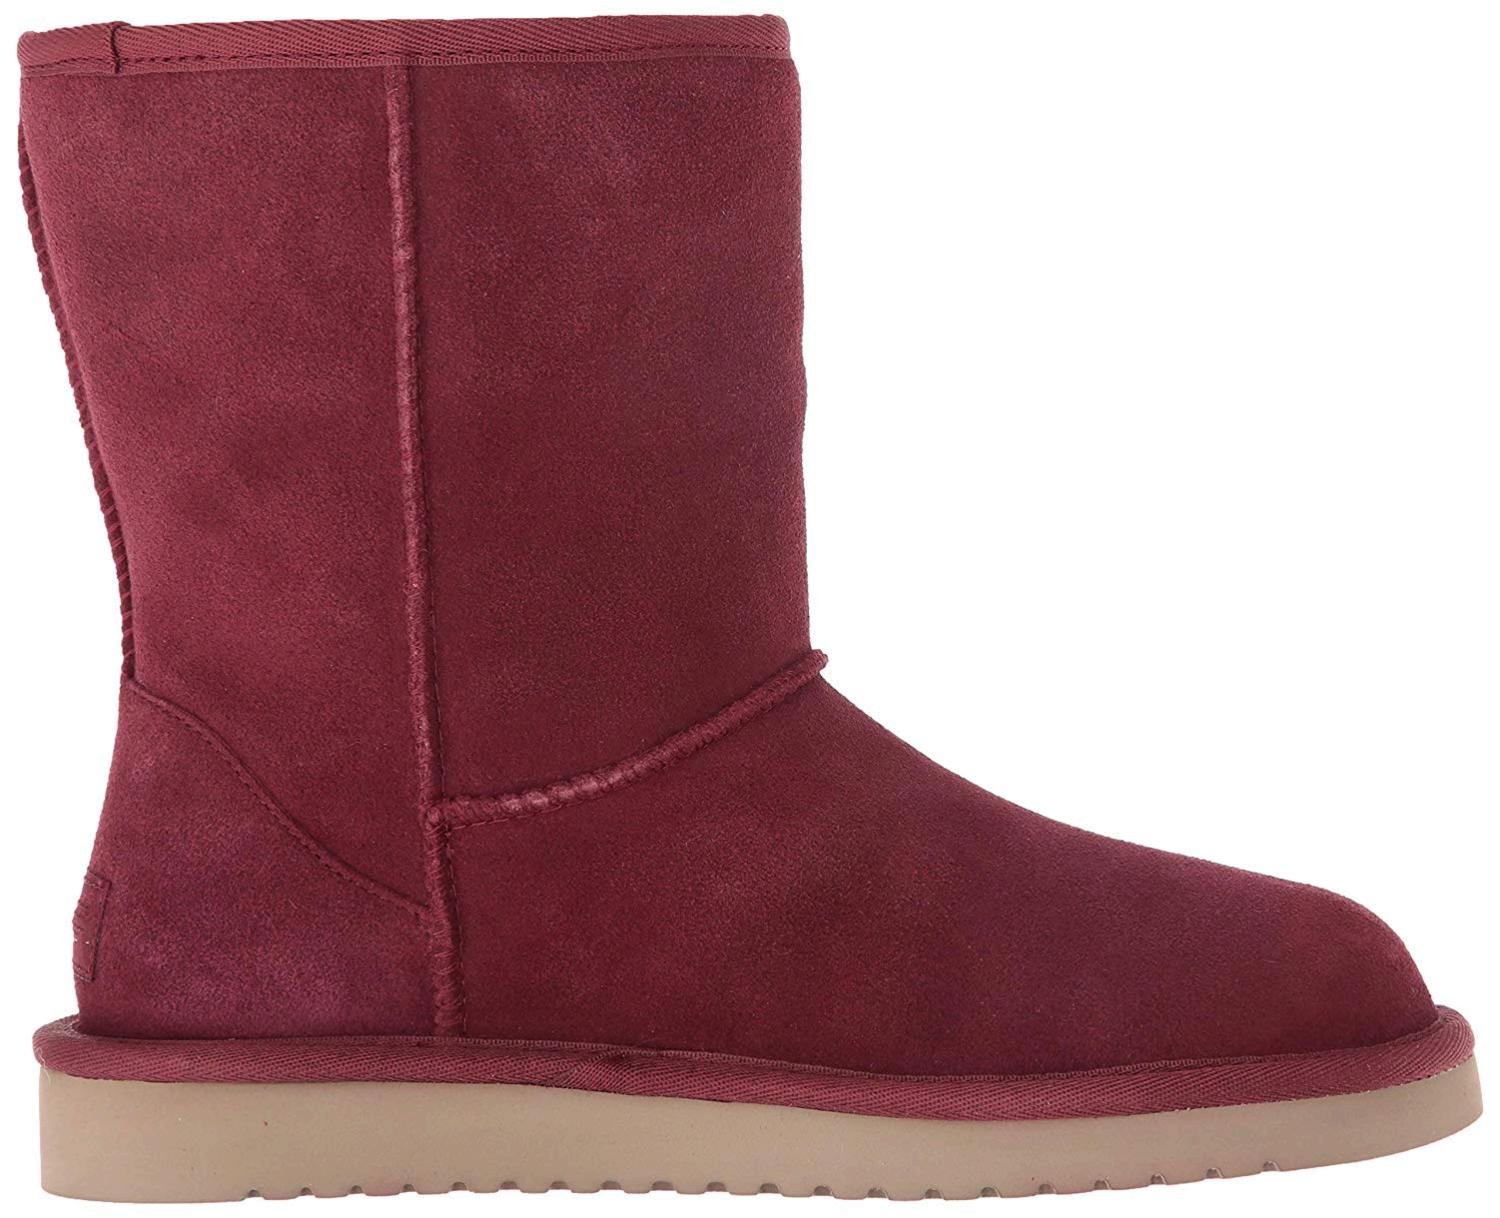 Koolaburra by UGG Womens Boots in Red Color, Size 6 ATR